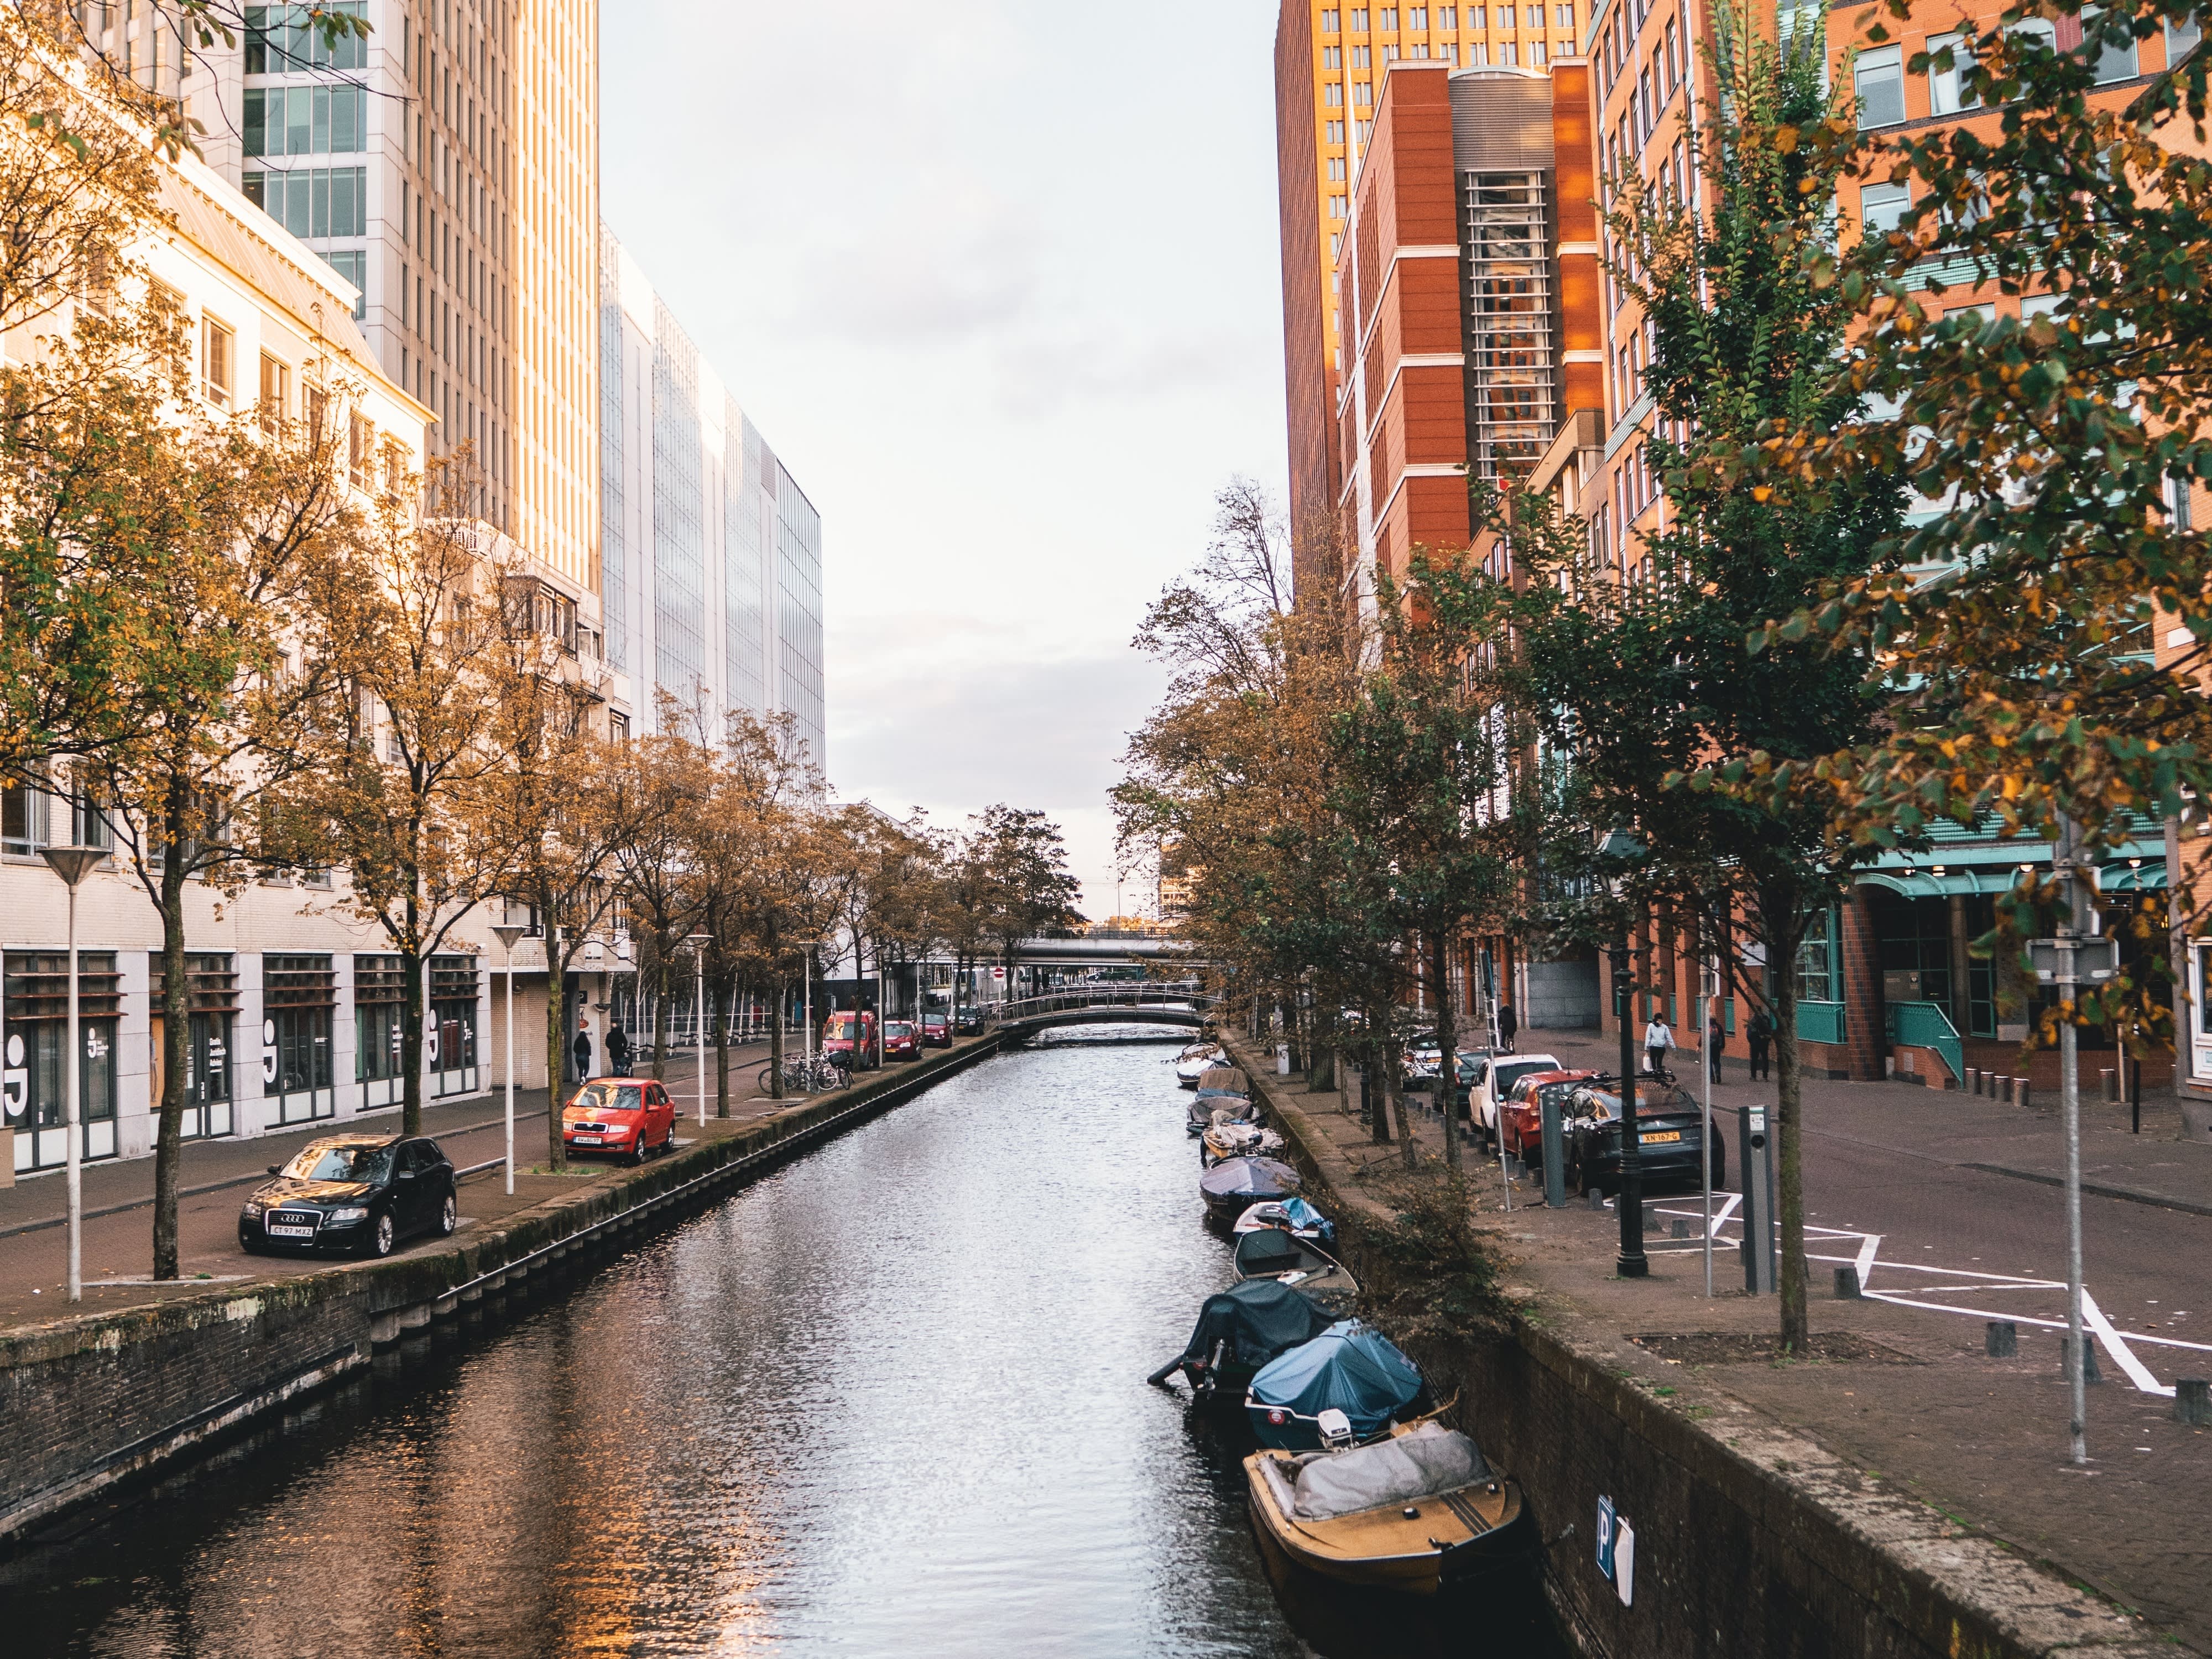 Picture of a canal with boats in The Hague, with skyscrapers along it